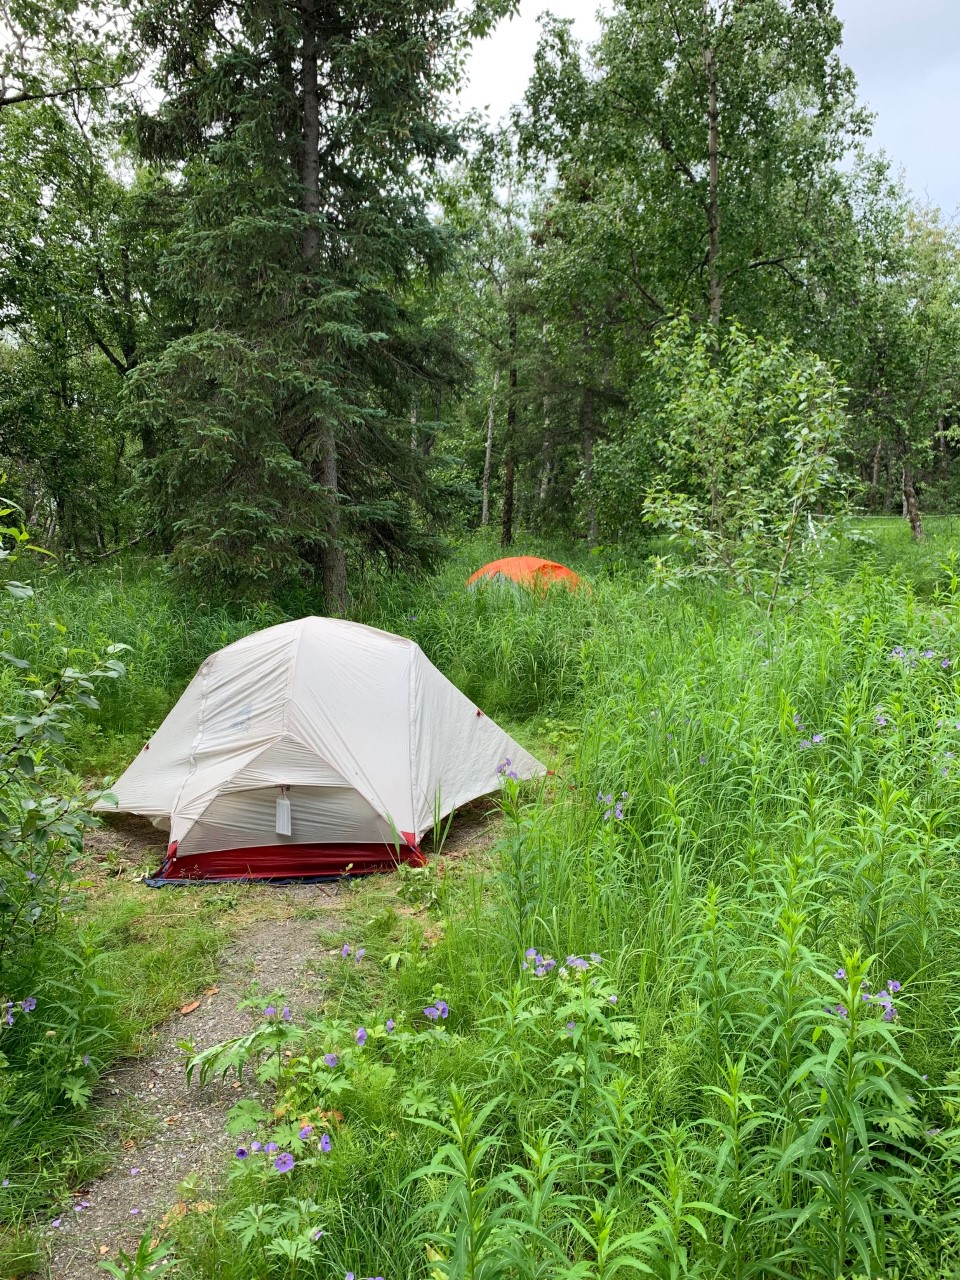 A short trail leading to a white tent.  A second orange tent is in the background.  Both tents surrounded by tall grasses and trees.